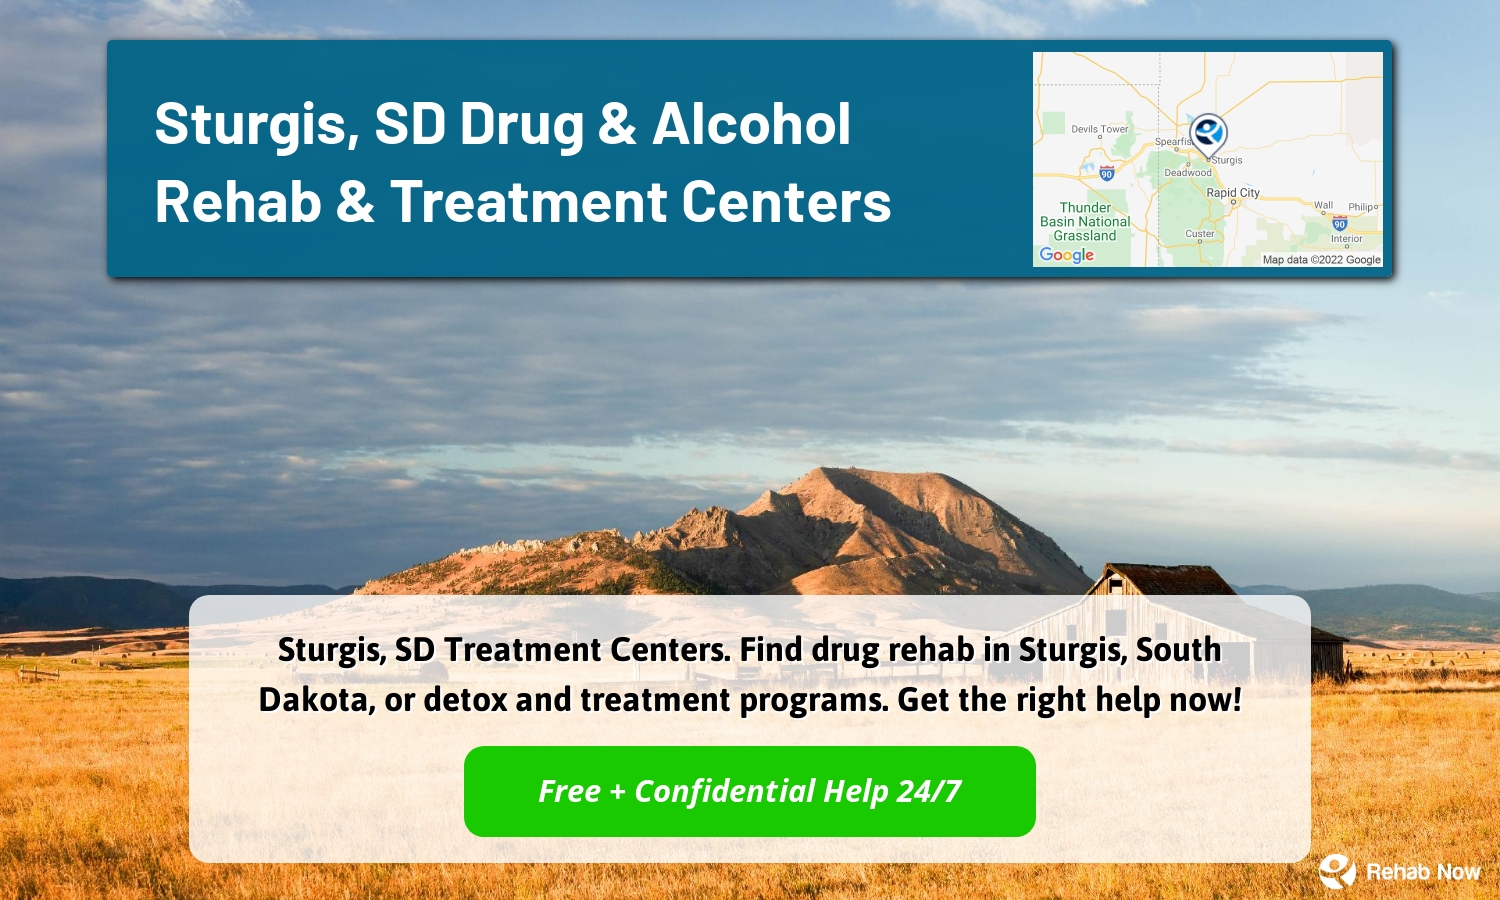 Sturgis, SD Treatment Centers. Find drug rehab in Sturgis, South Dakota, or detox and treatment programs. Get the right help now!